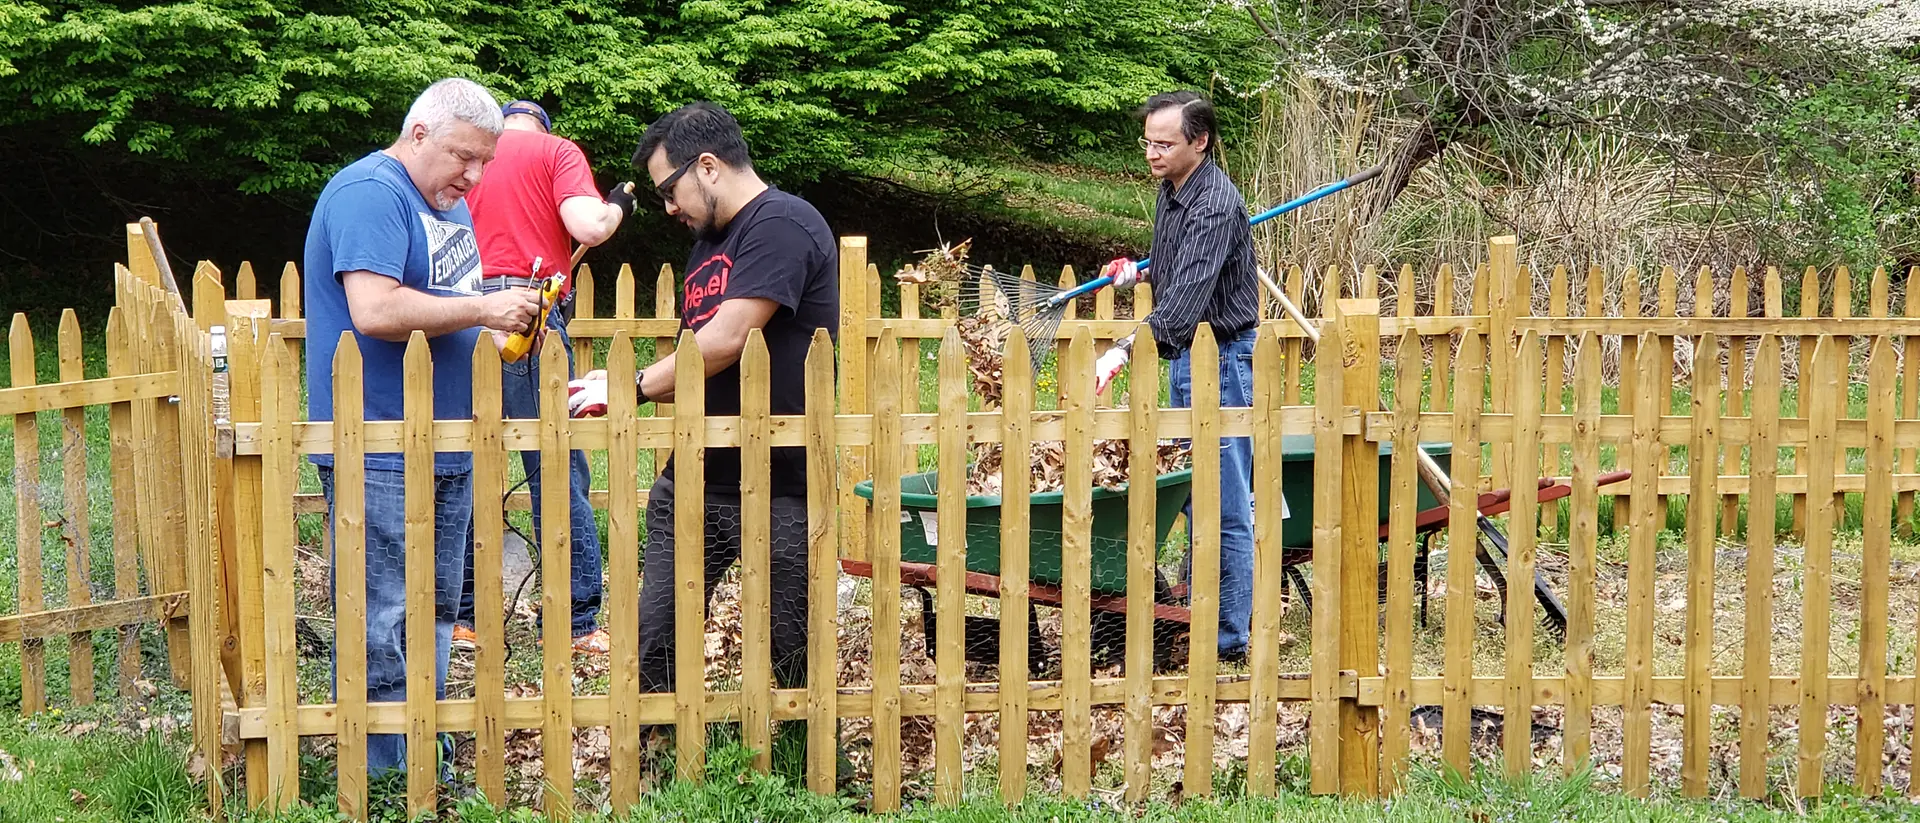 Henkel employees work on cleaning up a yard, with rakes and a wheelbarrow.